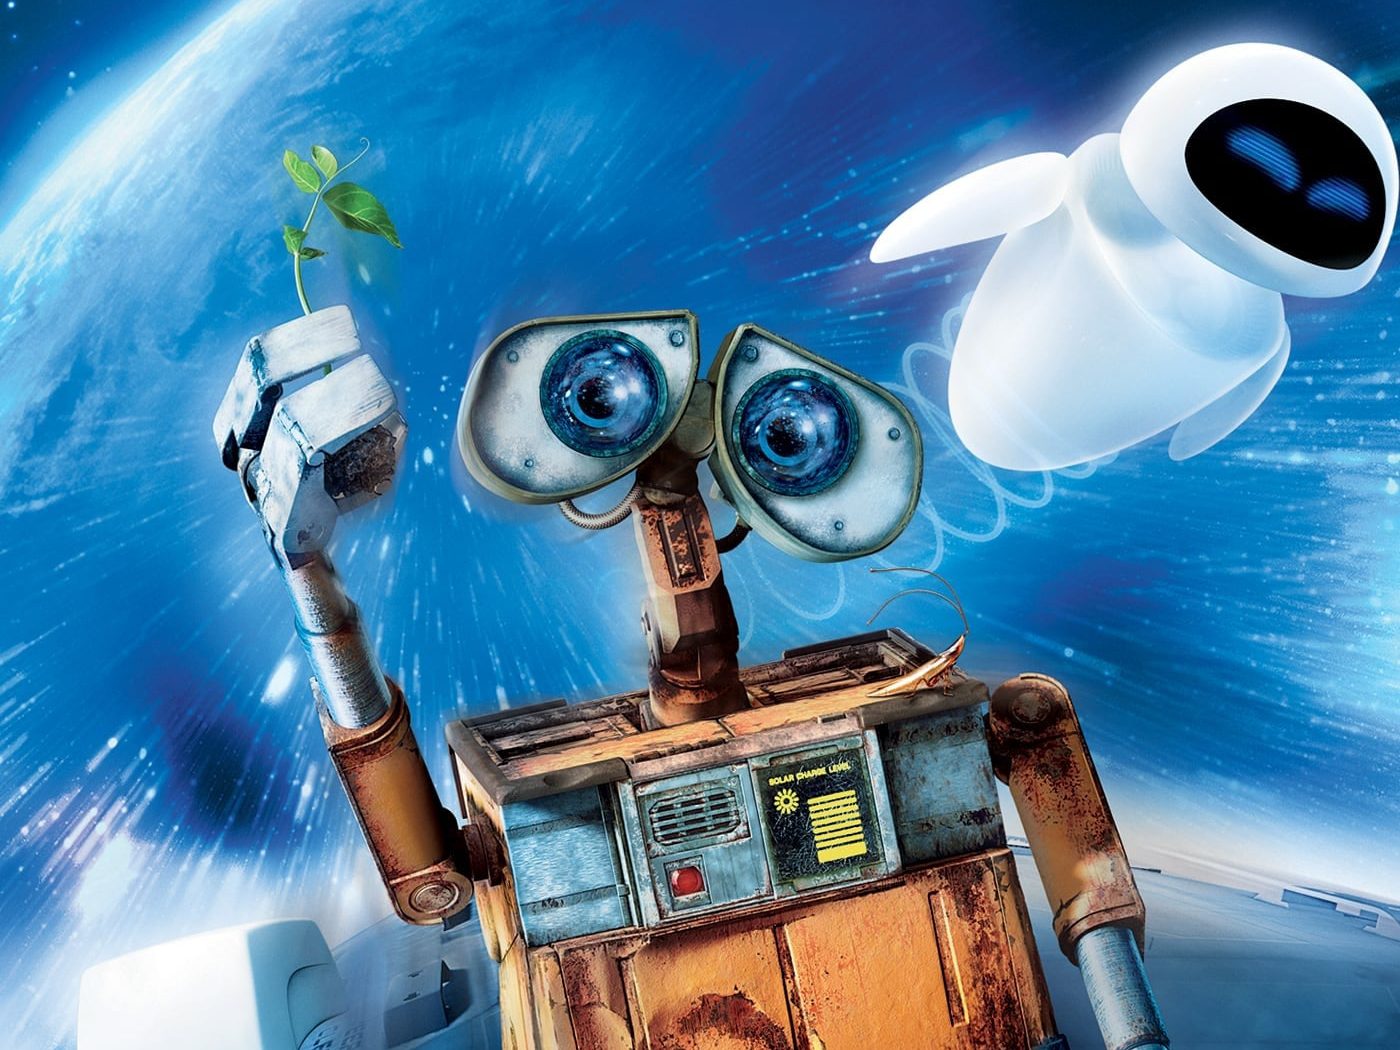 Poster for the movie "WALL·E"